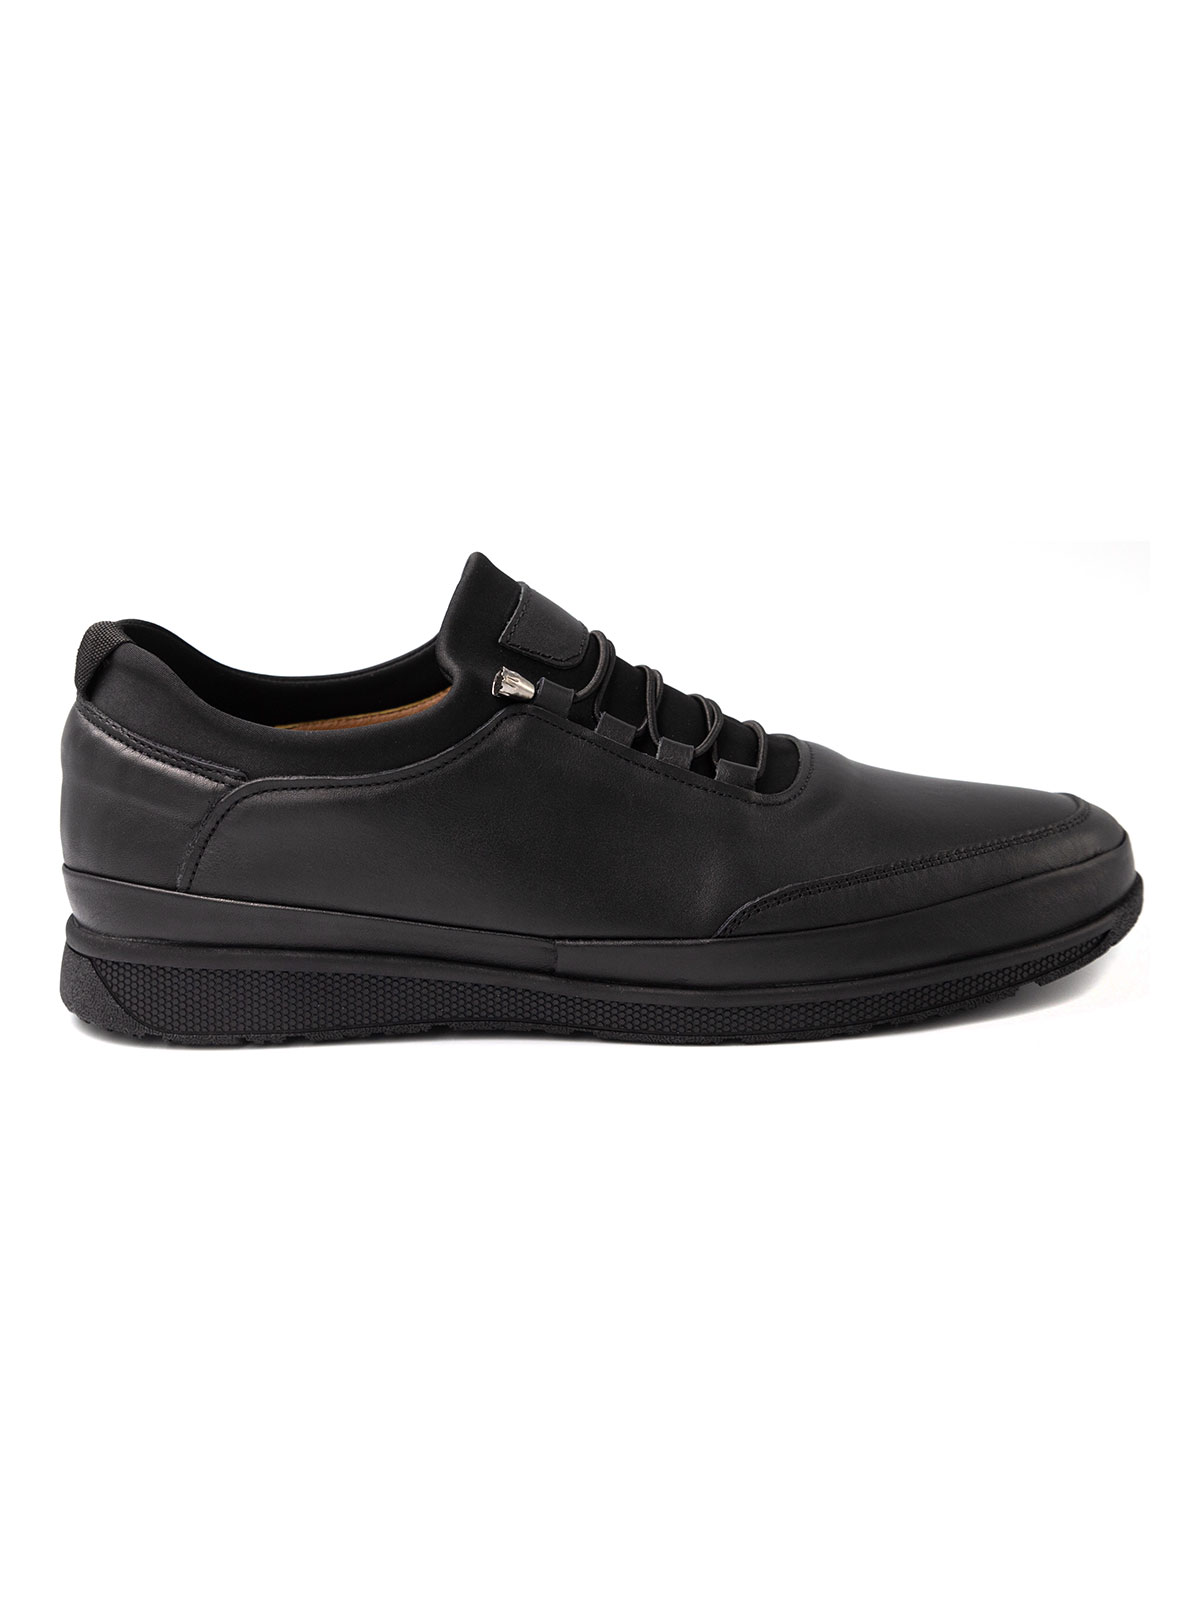 Black leather shoes with elastic laces - 81095 - € 41.62 img3